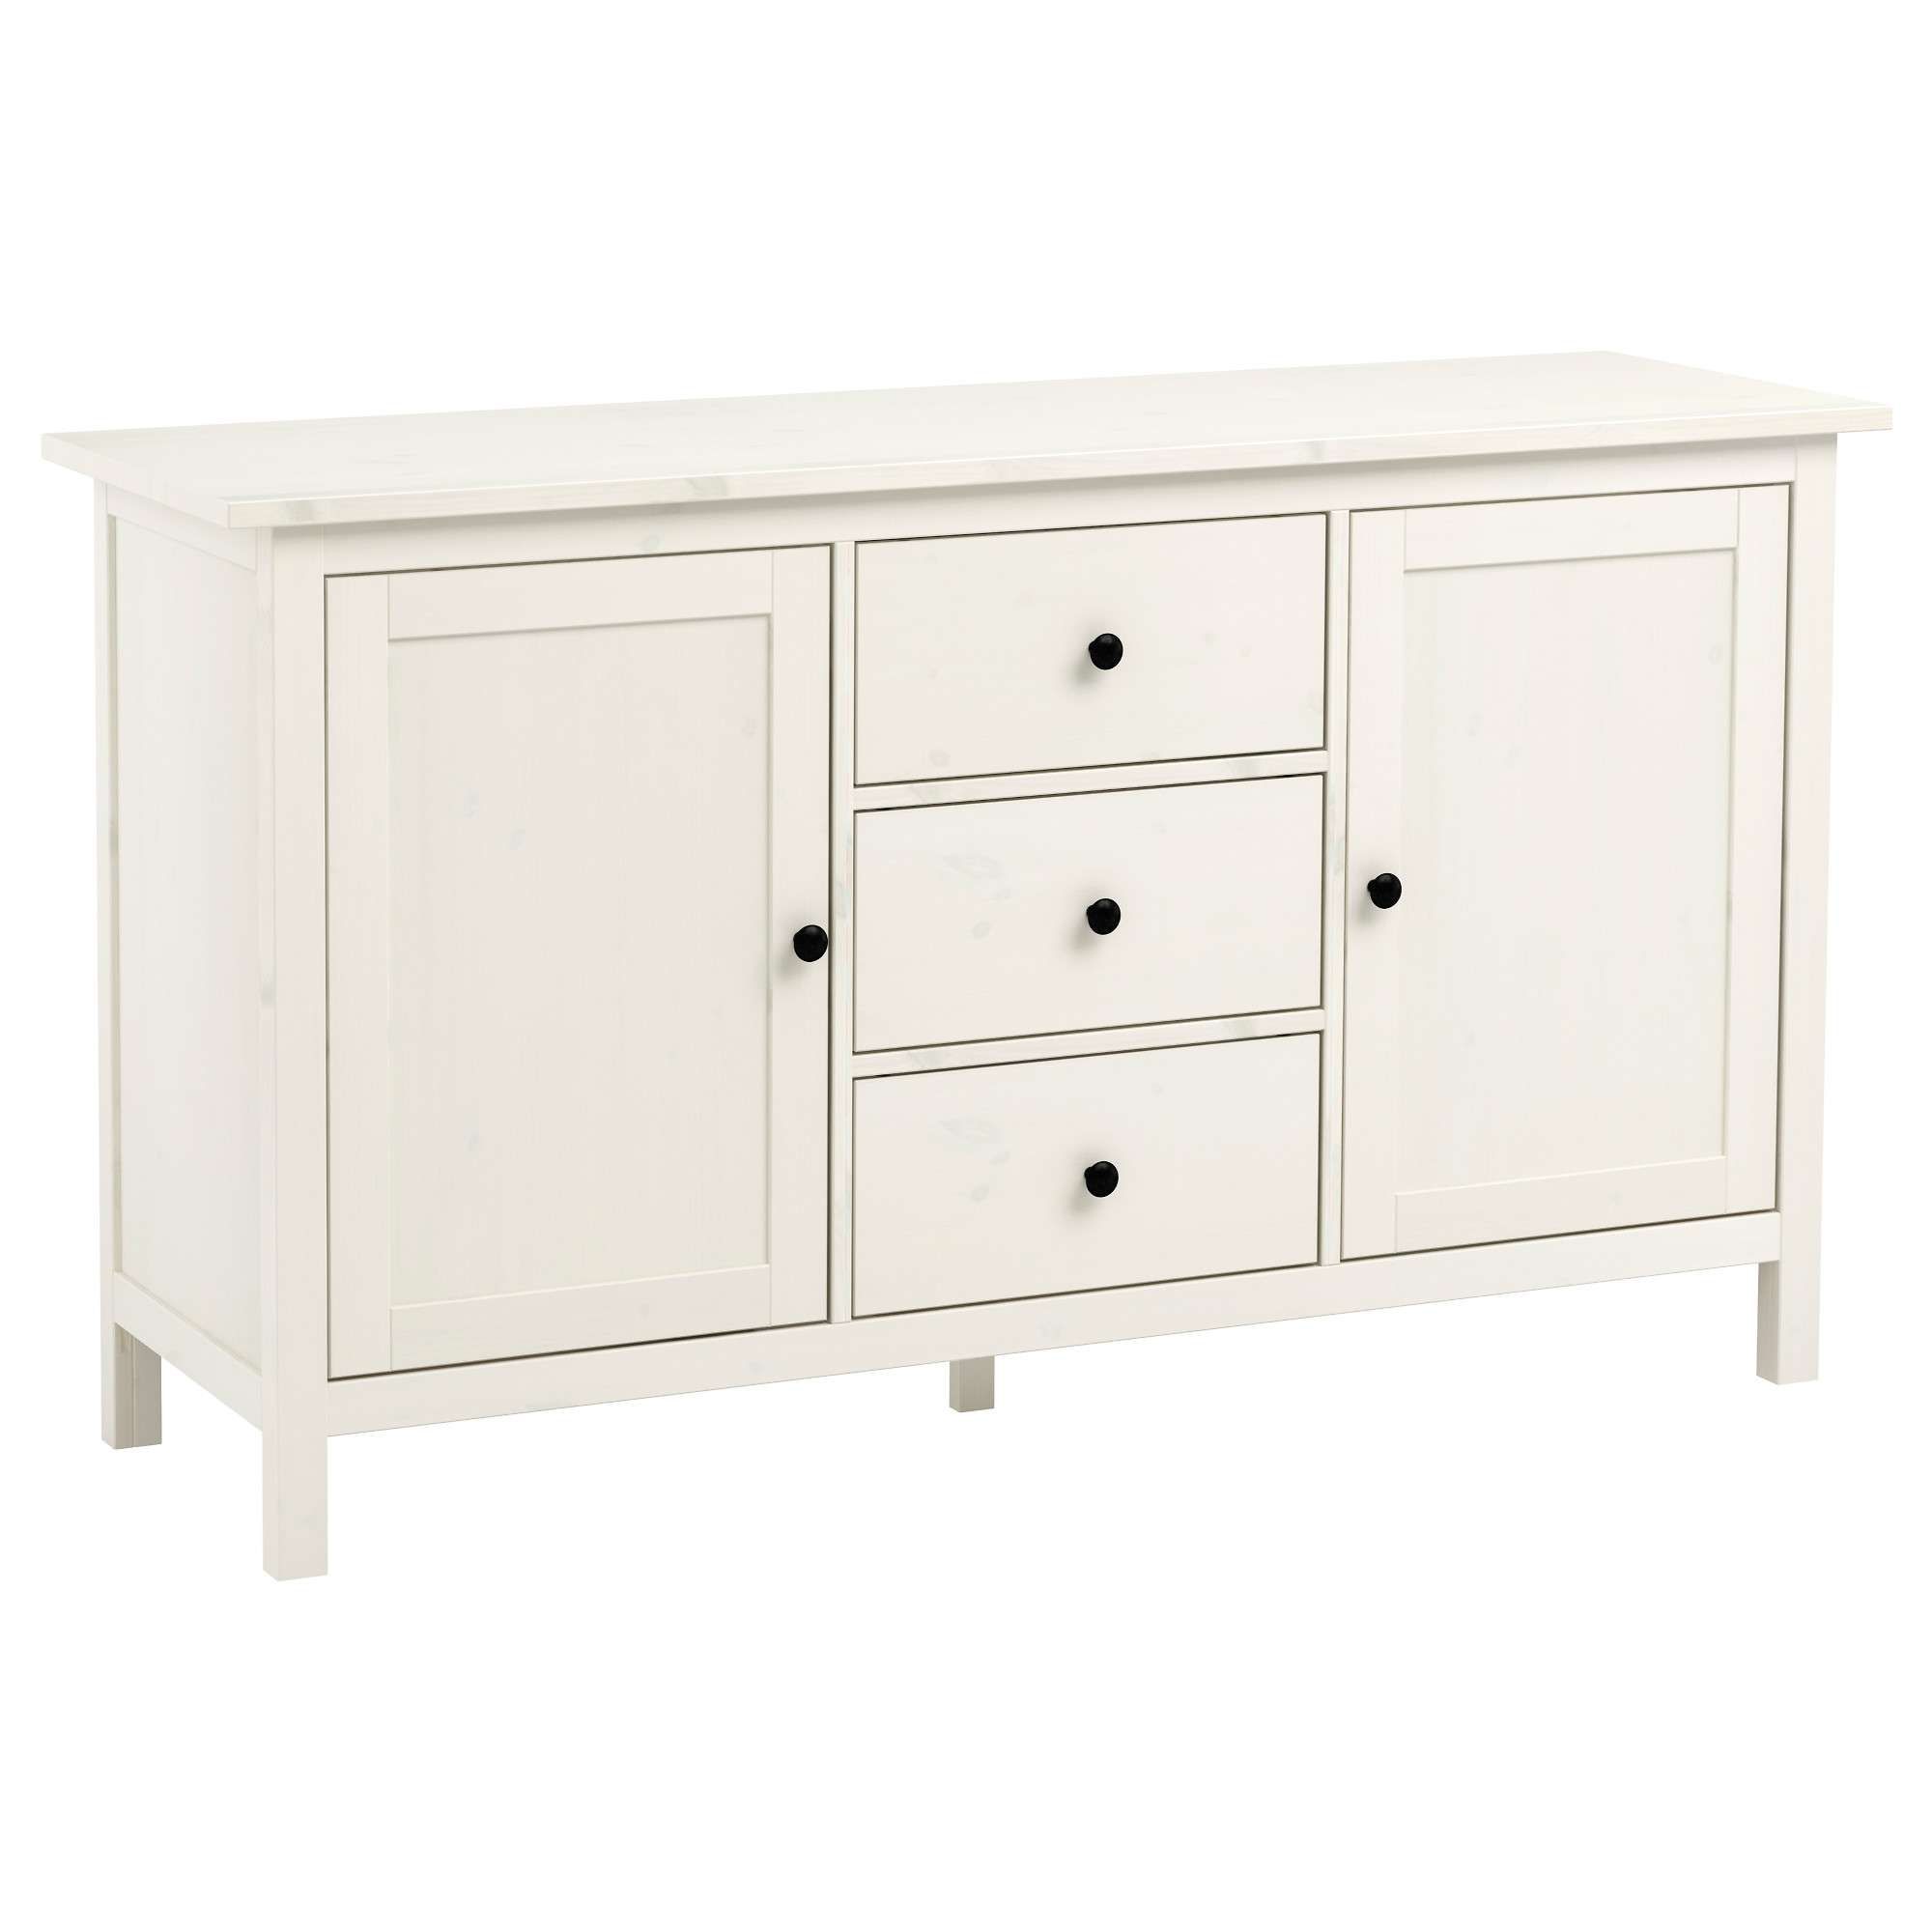 Hemnes Sideboard – White Stain – Ikea With Glass Door Buffet Sideboards (View 12 of 20)